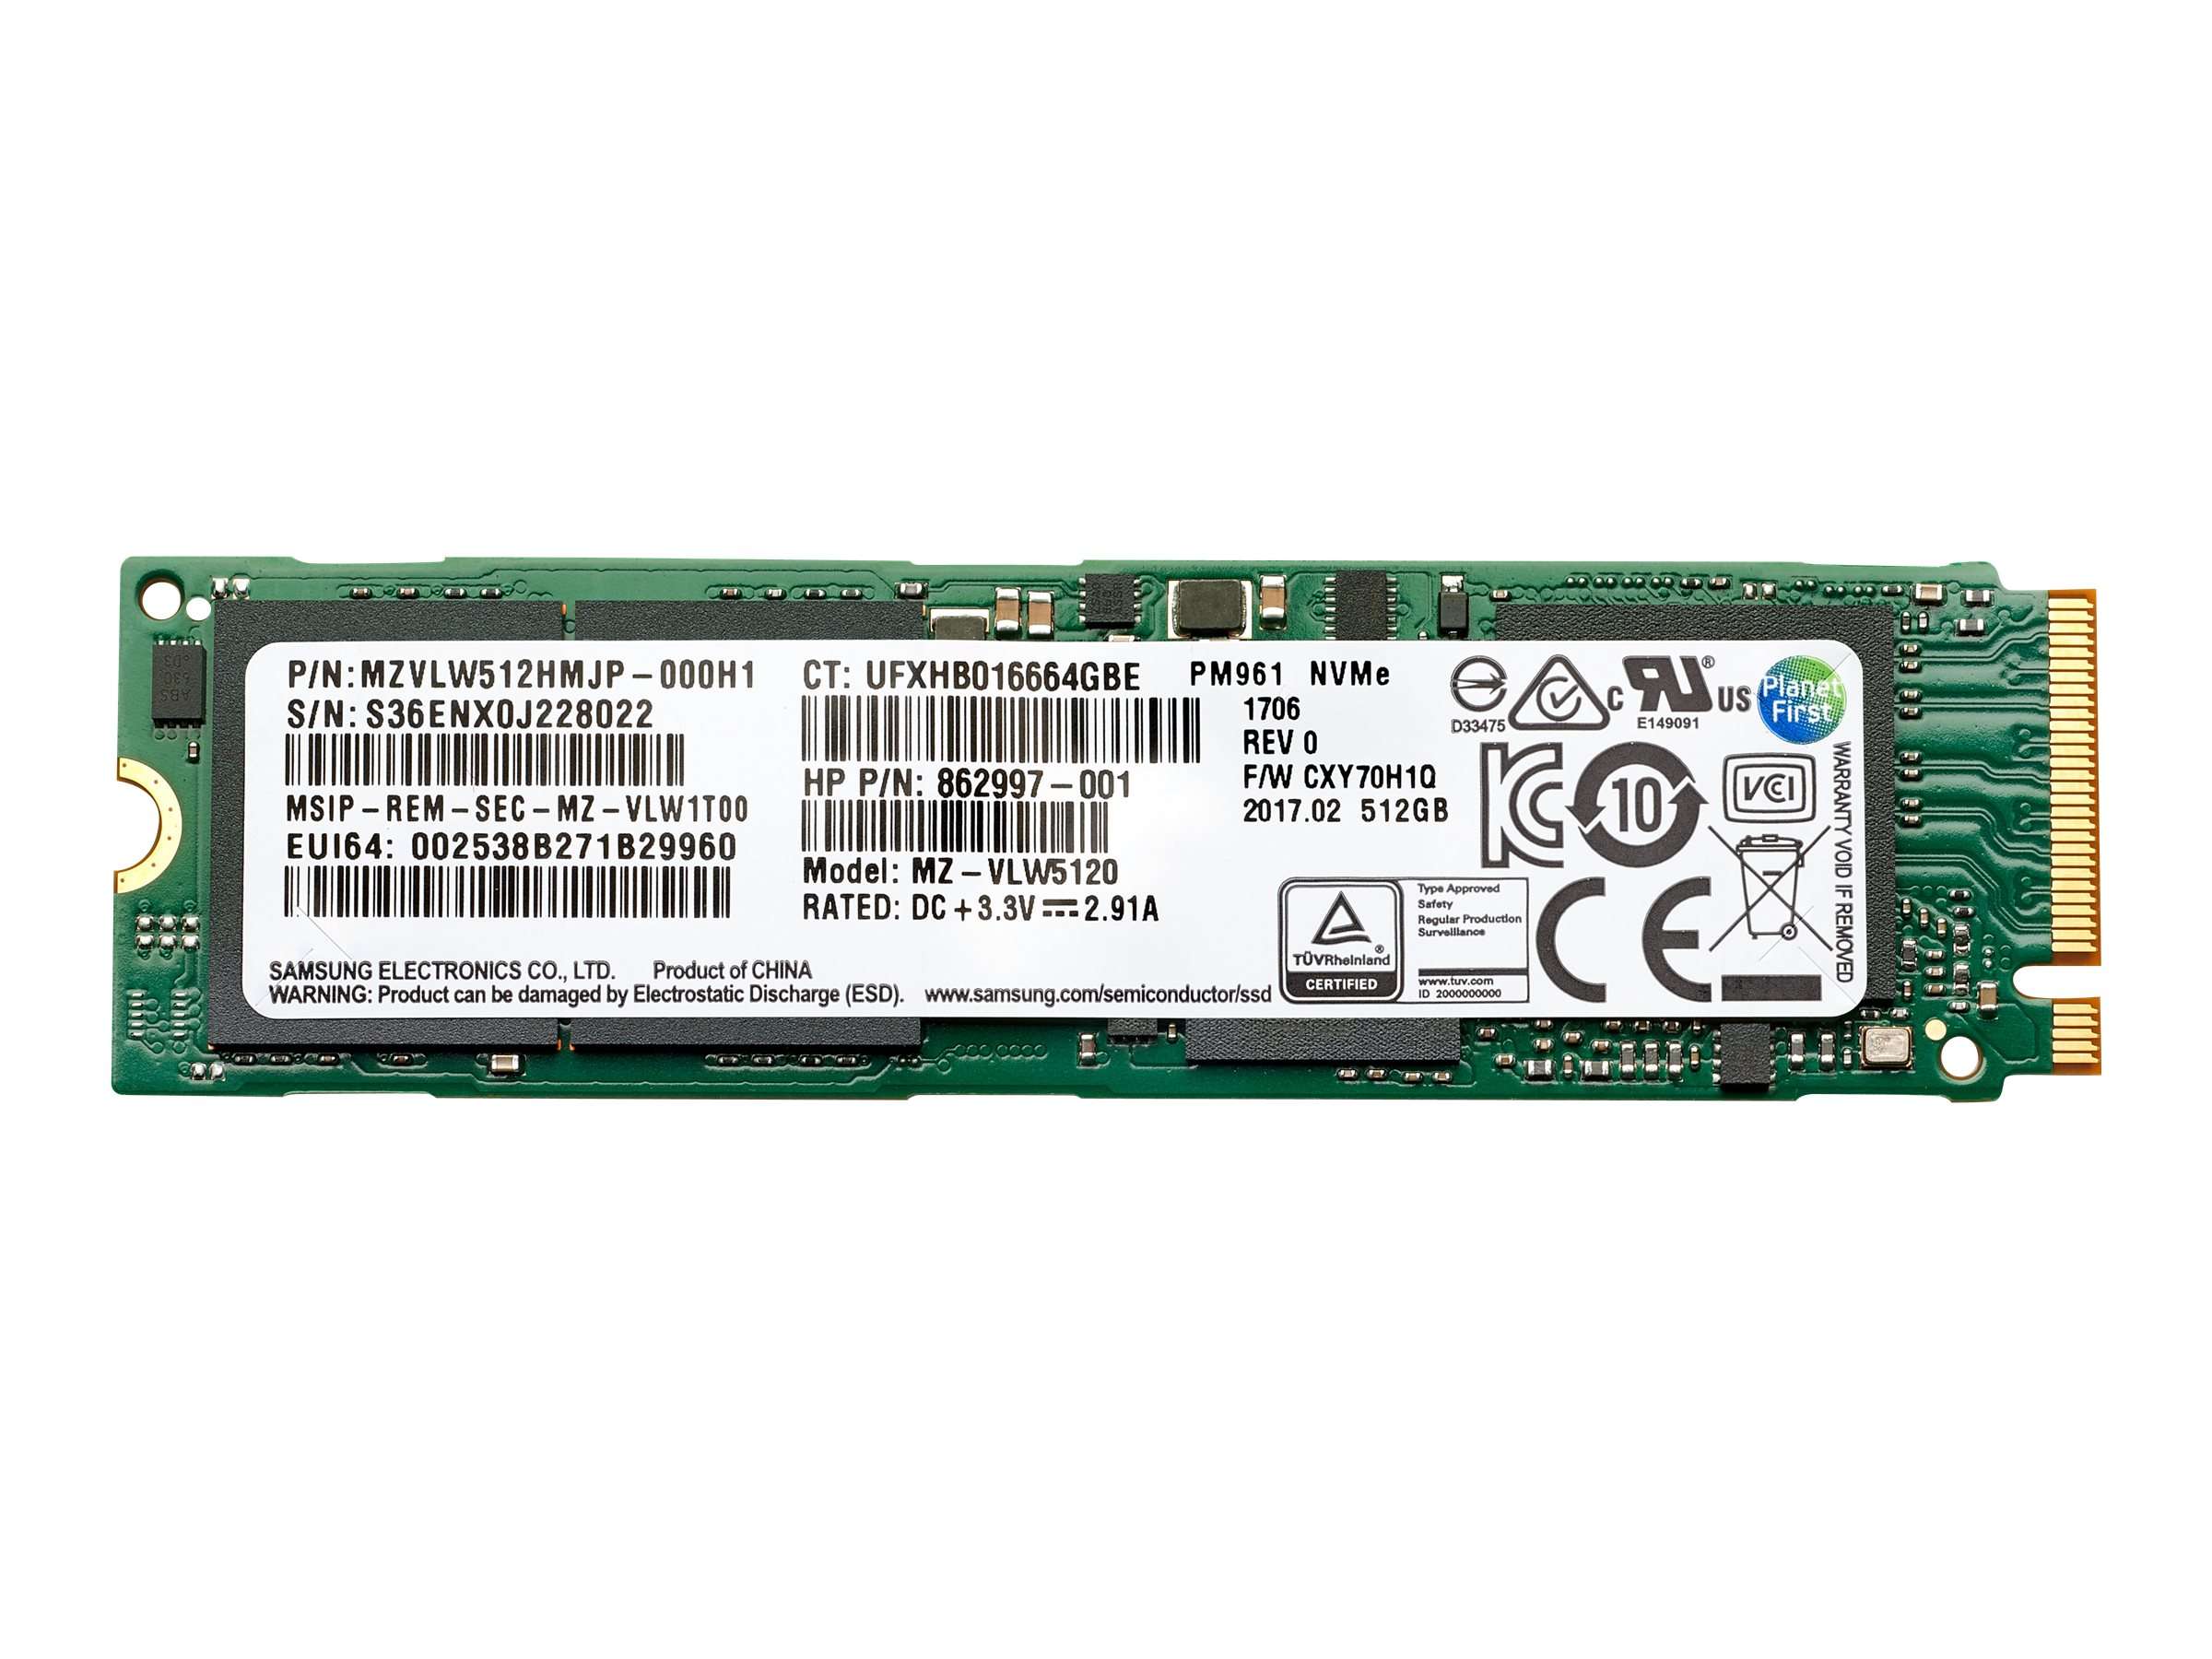 Hp 1fuaa Ac3 512gb Tlc Pci E 3x4 Nvme Ss New And Refurbished Buy Online Low Prices